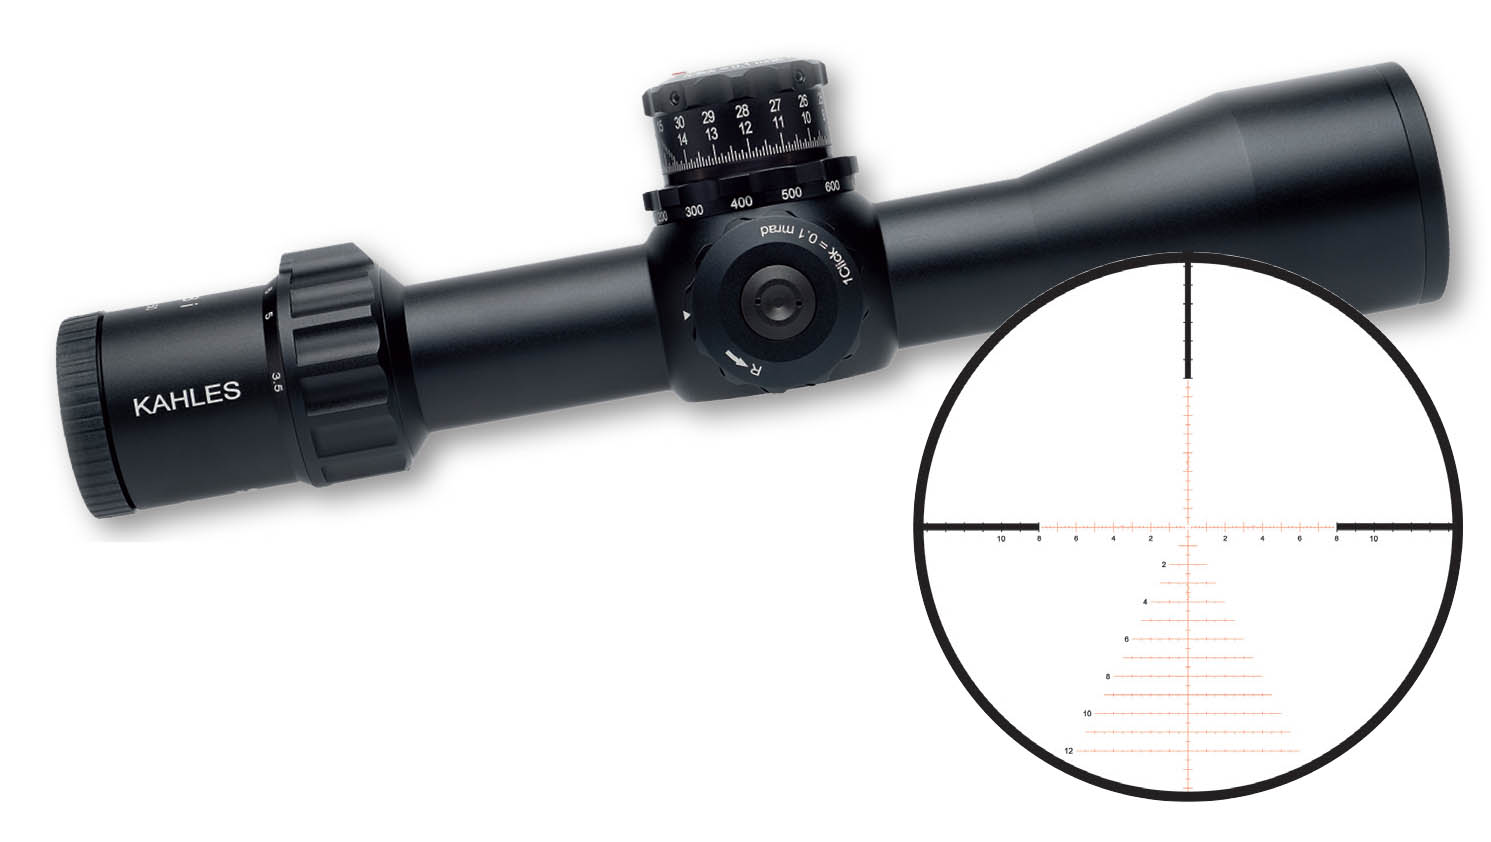 The Kahles K318i 3.5-18x 50mm scope is available with two different reticles, including the SKMR3 John used.